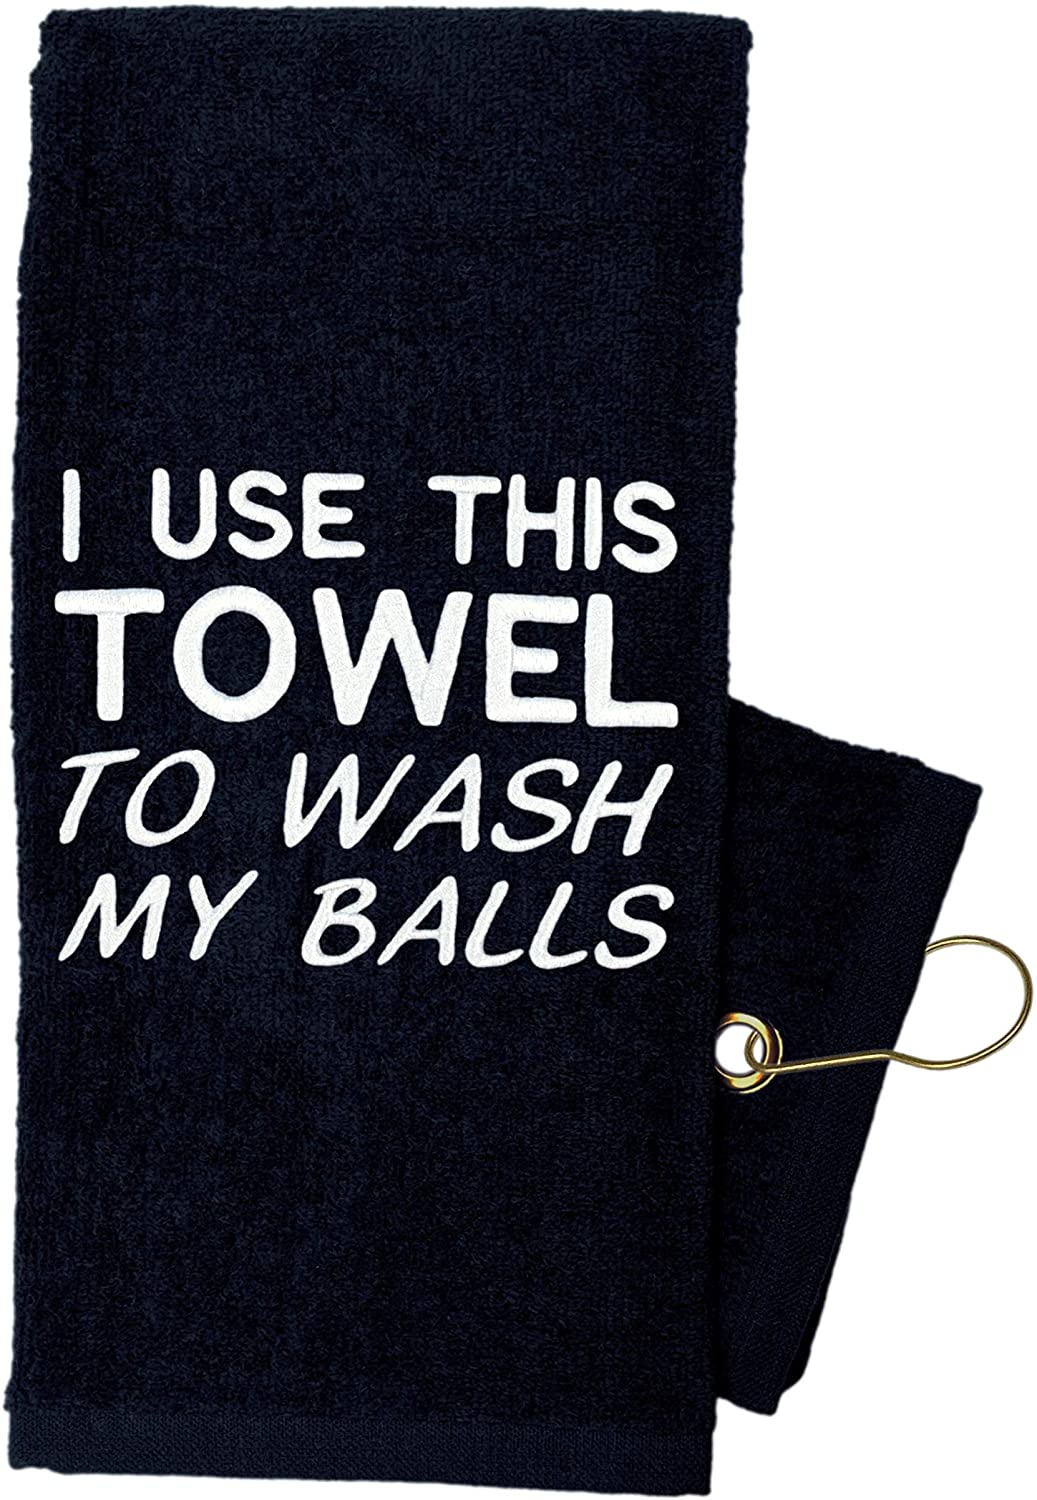 Golf Towel Store - Funny Golf Towels for Men, Embroidered Golf Towels for Golf Bags with Clip - 100% Cotton or Waffle Microfiber Options (I Use This Towel to Wash My Balls)